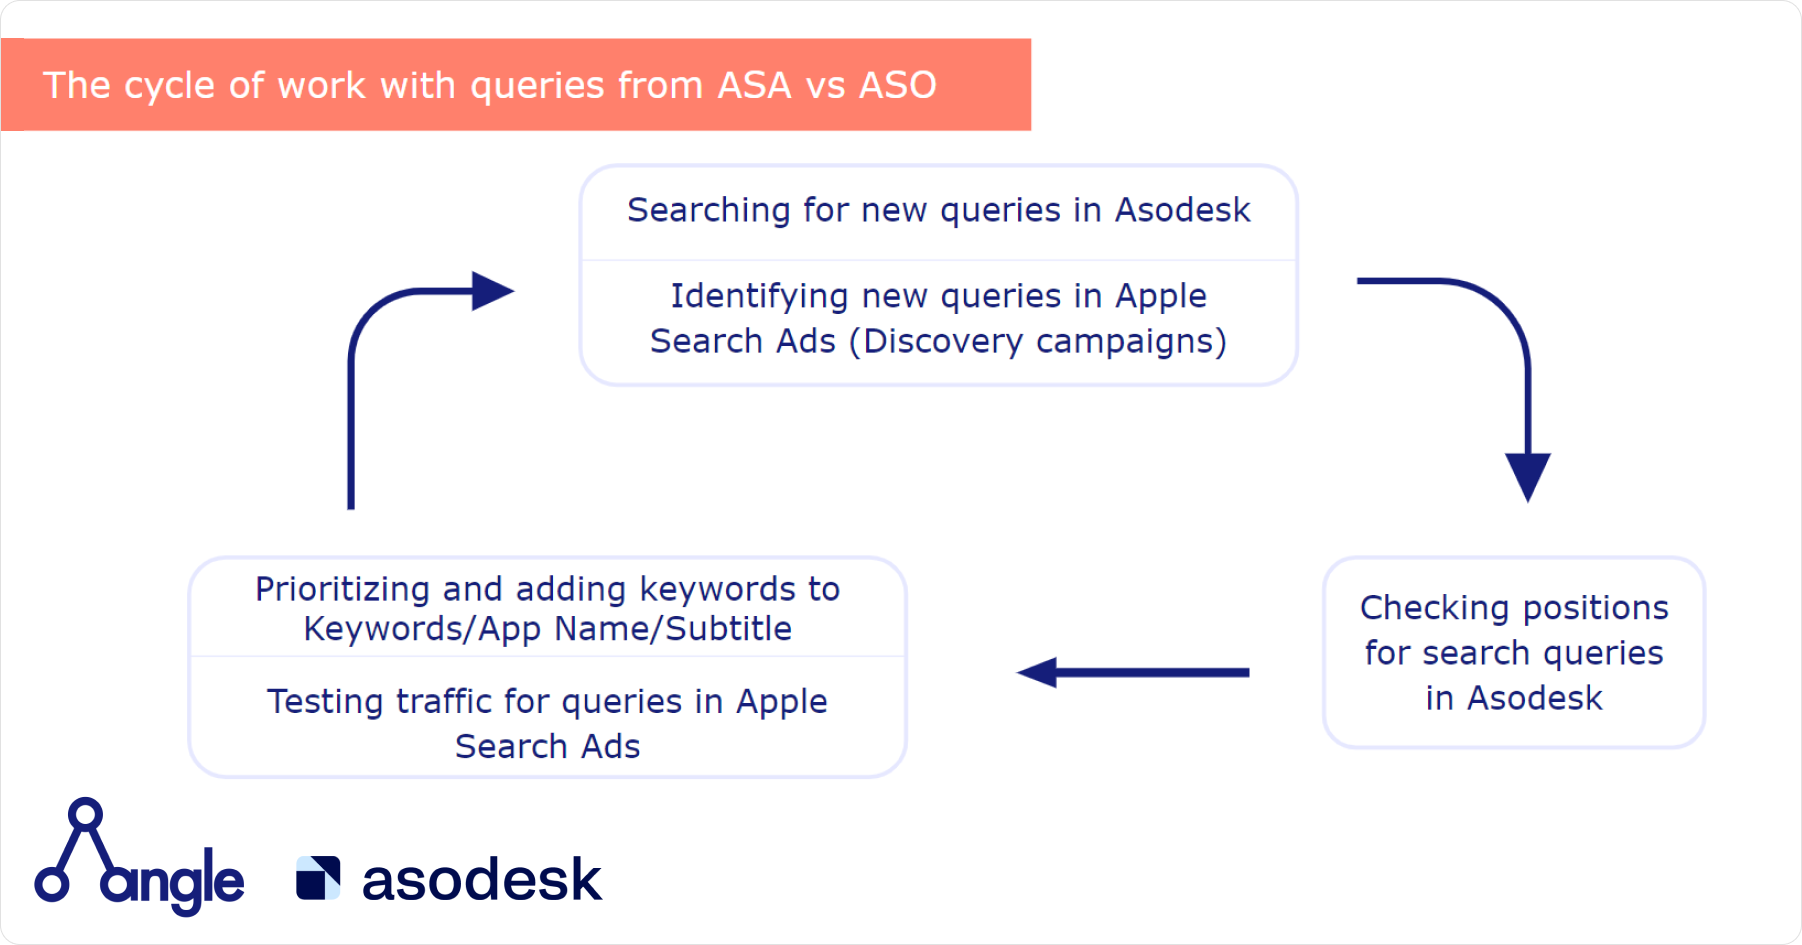 You can see the ASA and ASO cycle of working with queries